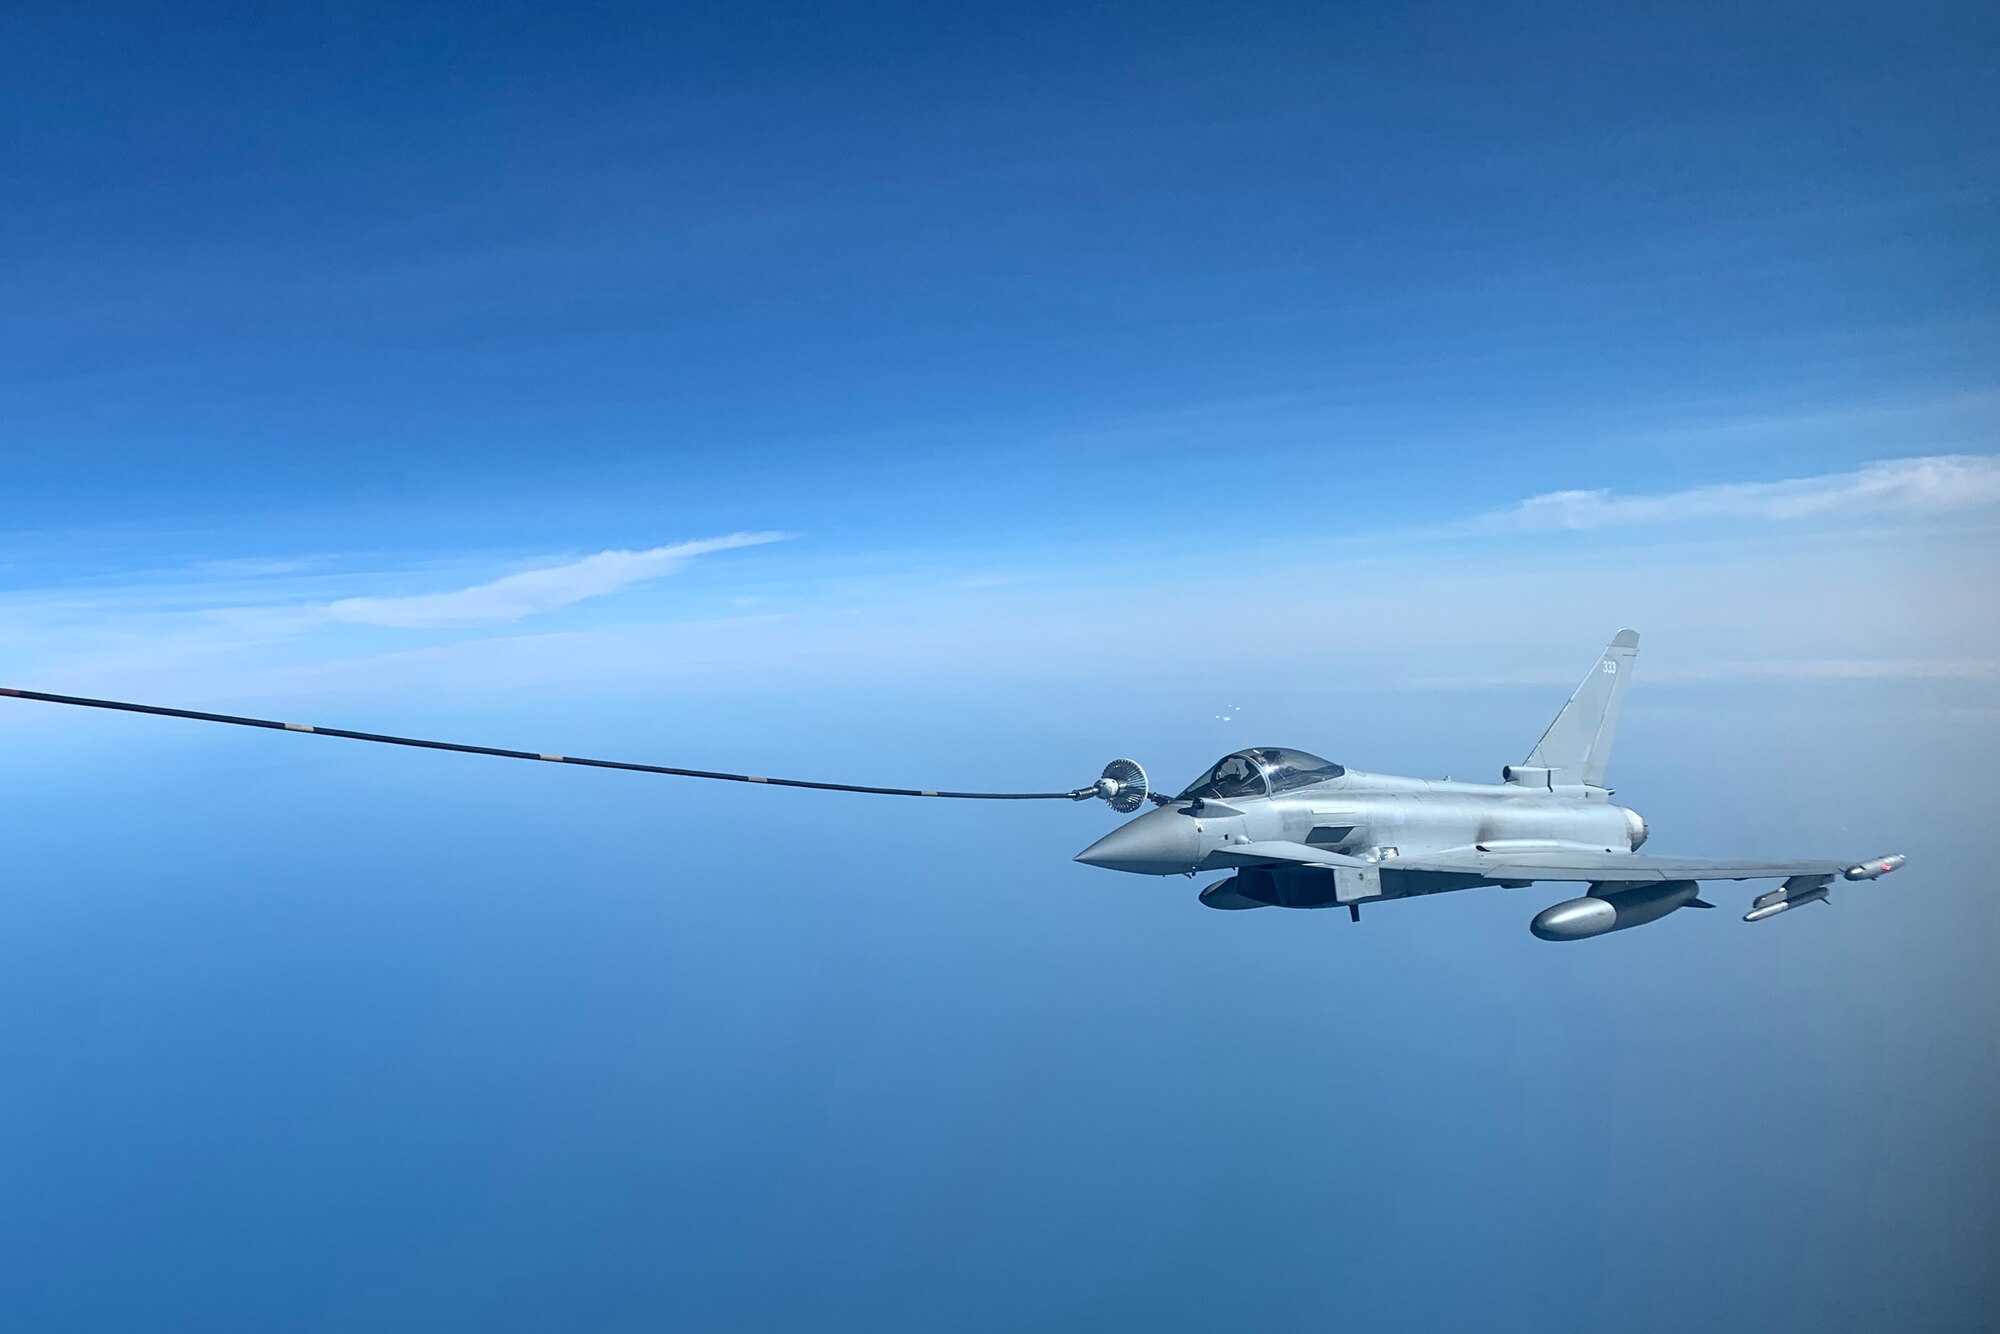 A Royal Air Force Eurofighter Typhoon aircraft receives fuel over the North Sea from a U.S. Air Force KC-135 Stratotanker aircraft assigned to the 100th Air Refueling Wing during exercise Cobra Warrior 22, Sept. 21, 2022. Cobra Warrior develops the tactical interoperability skills of participating U.S. Airmen, allies and partners within a composite air operation environment. (U.S. Air Force photo by Tech. Sgt. Anthony Hetlage)